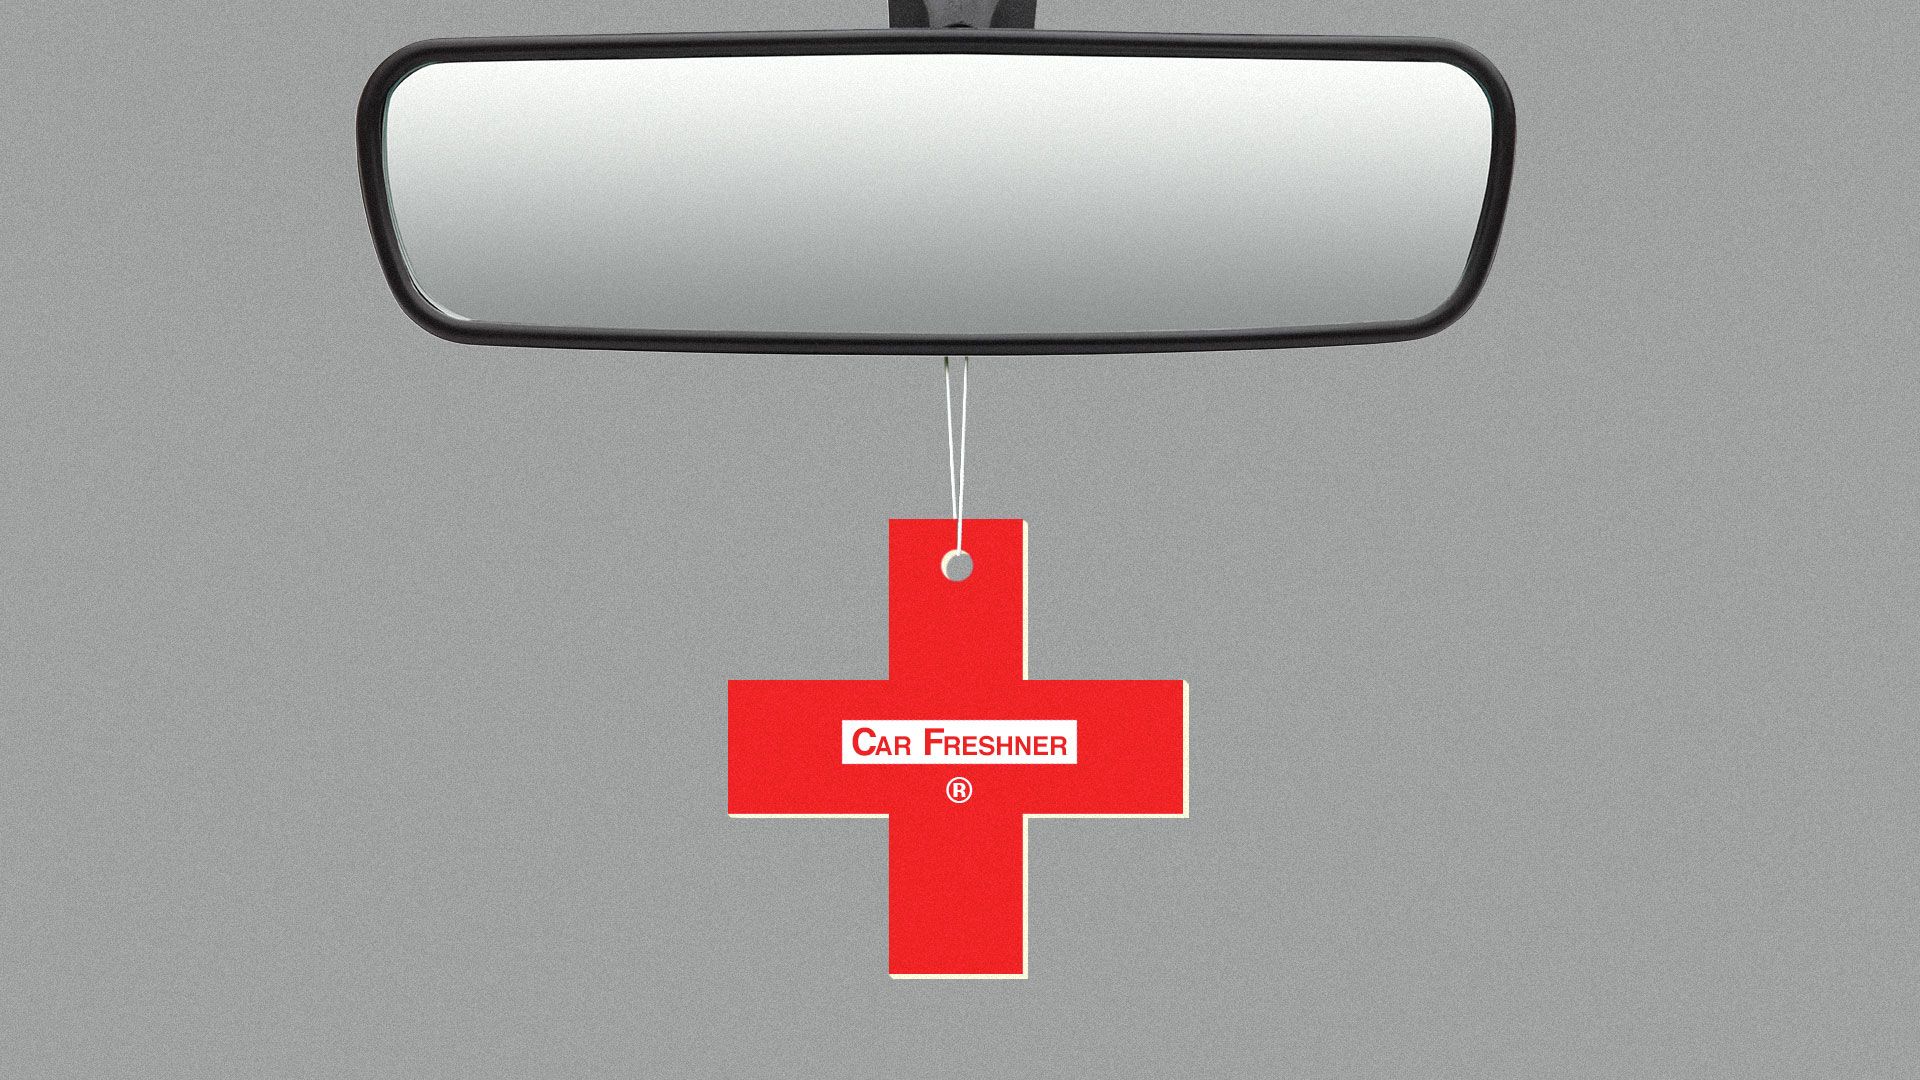 Illustration of an air freshener in the shape of a heart plus hanging from a rear view mirror.